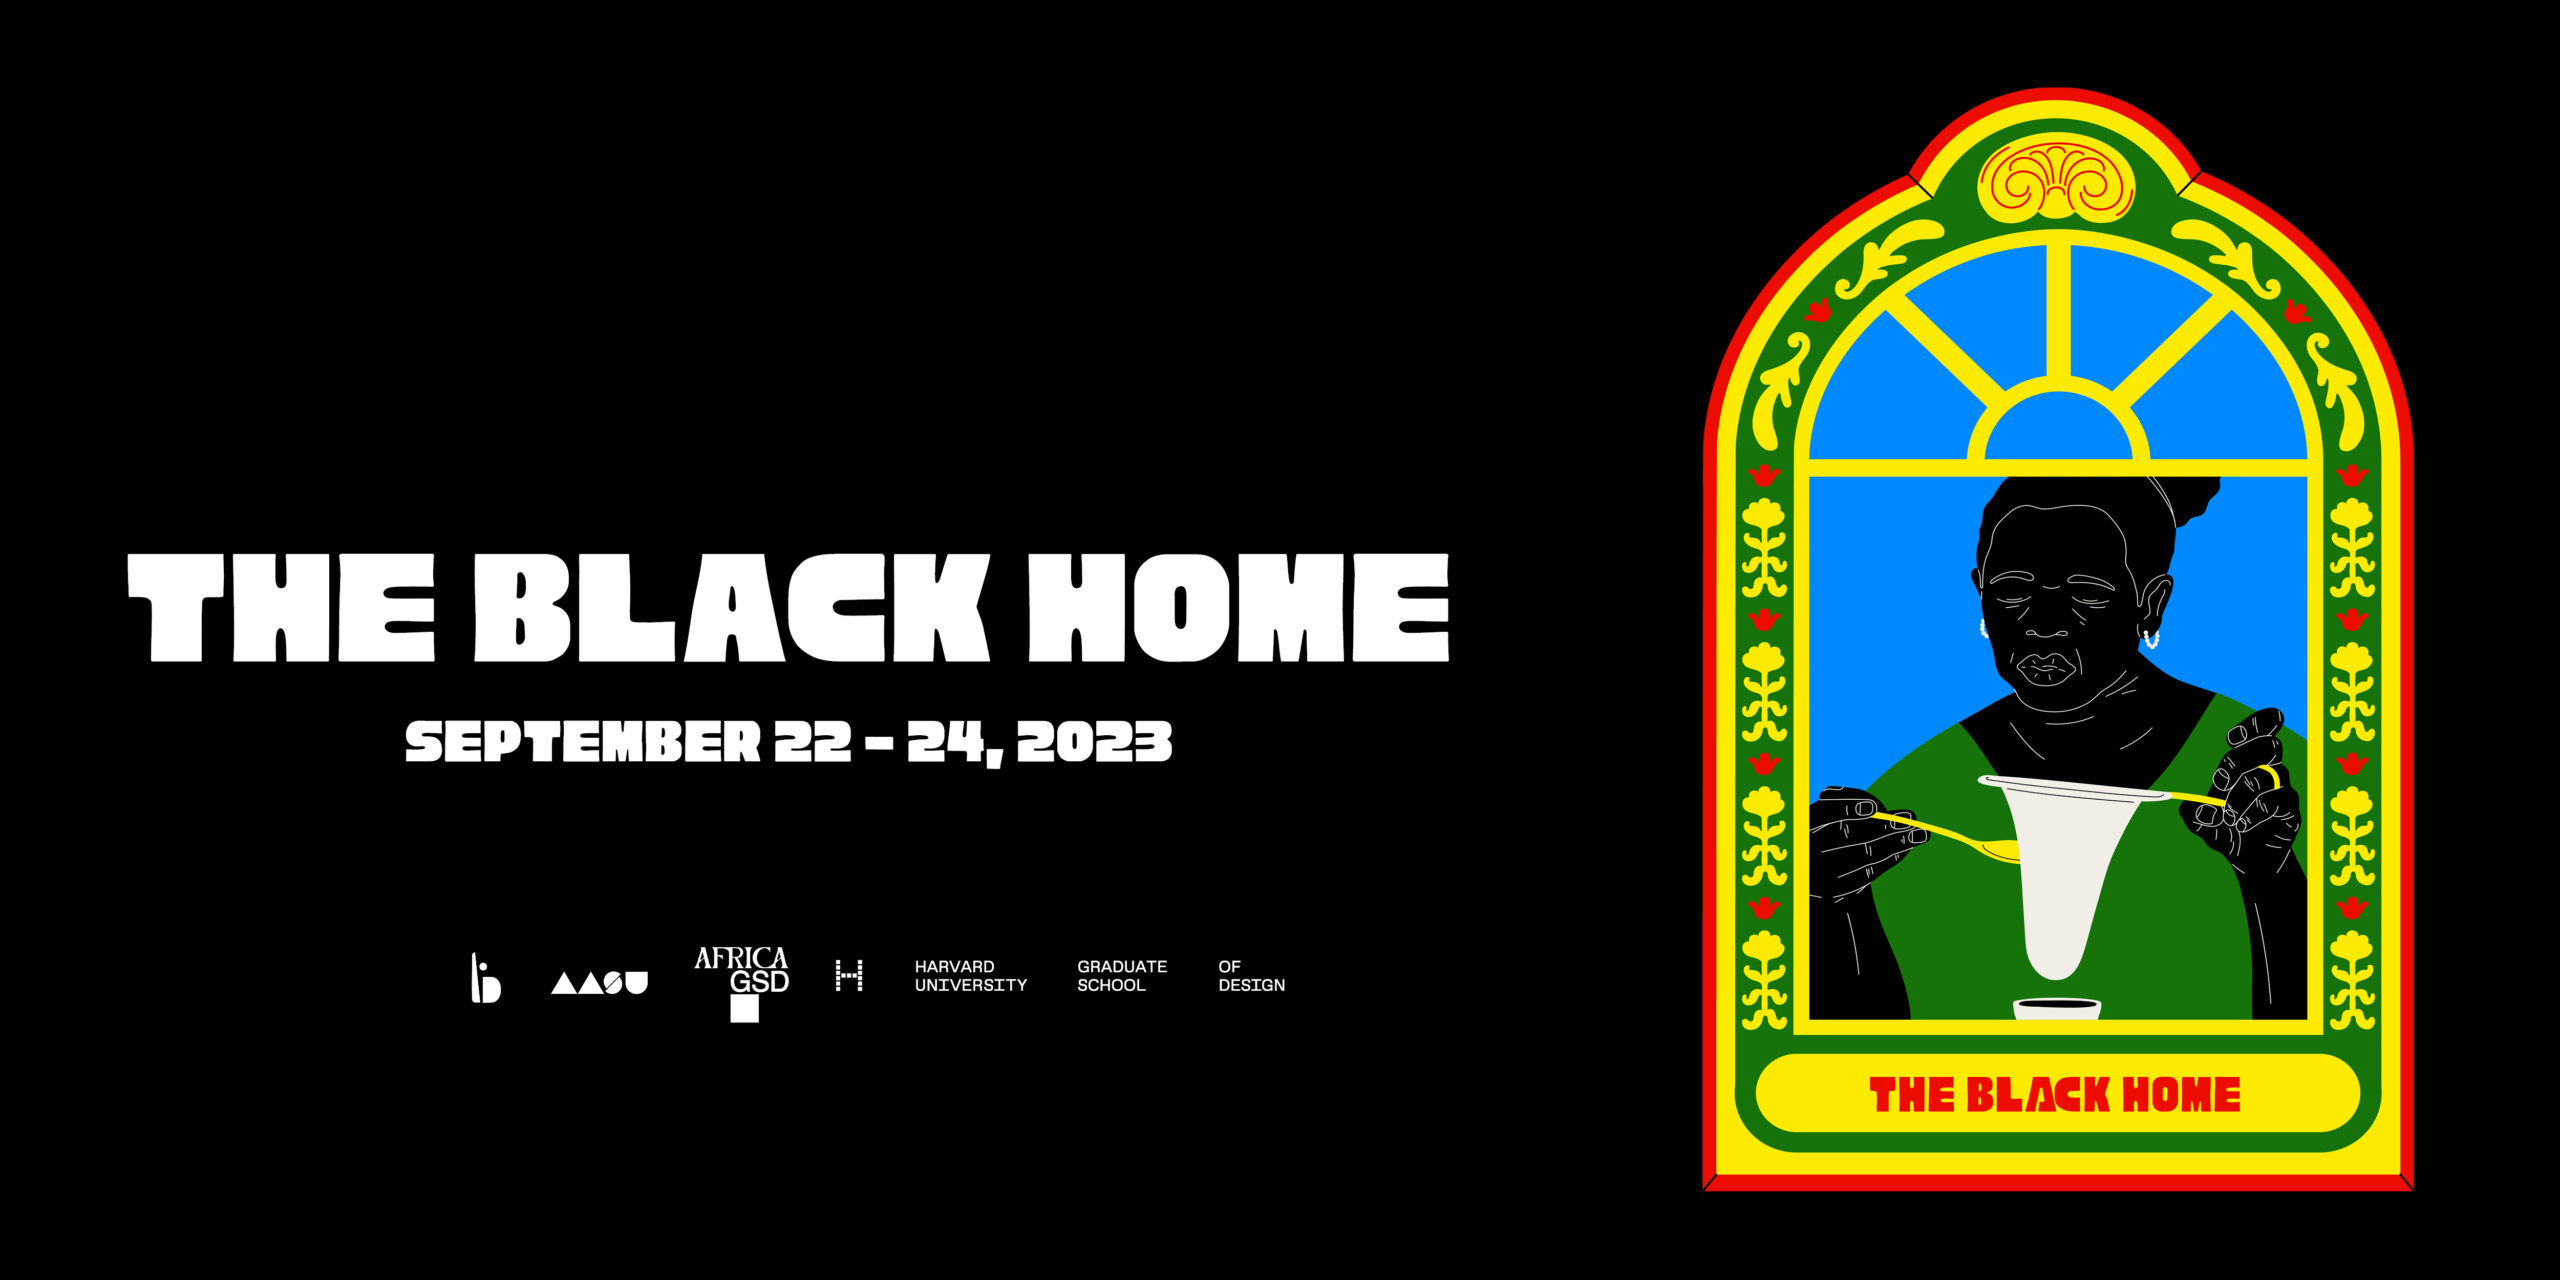 A banner with white text and a black background. The text on the left of the banner say "The Black Home, September 22-24, 2023" and the illustration to the right is of an ornate red, yellow and green window frame, behind which is a Black woman in a green shirt and white earrings making coffee.